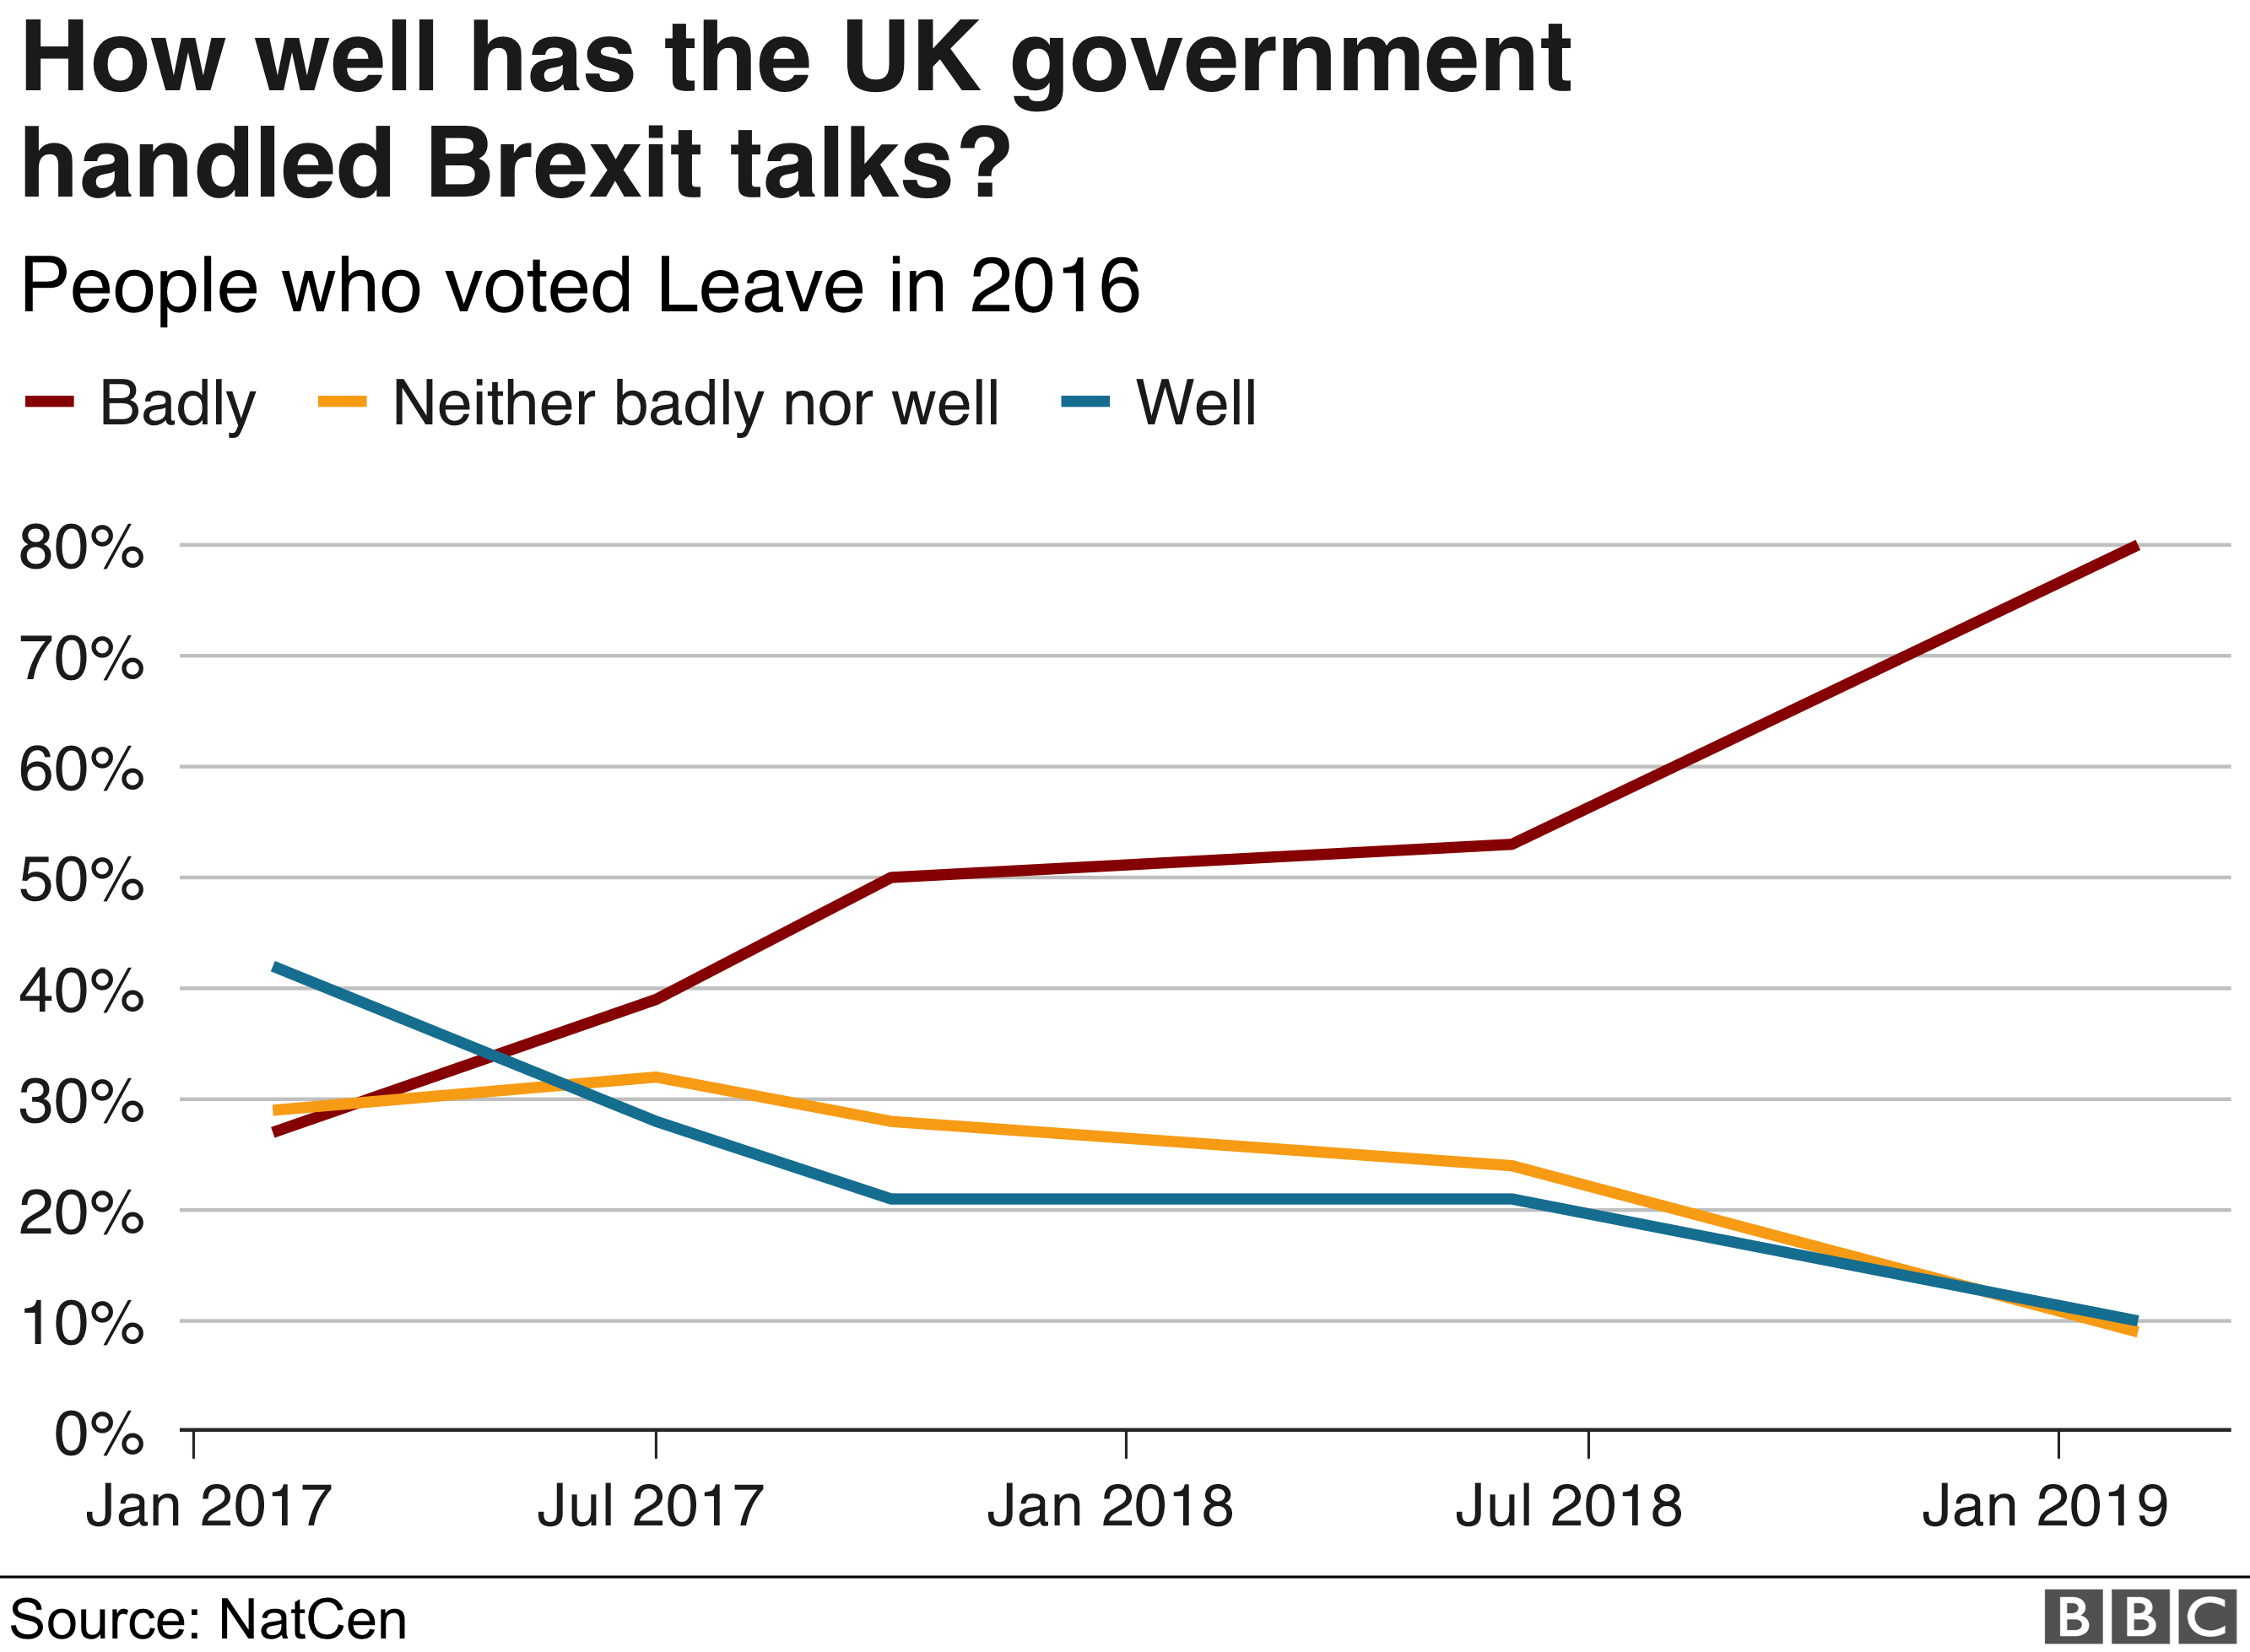 Chart showing opinion on how well the UK government has handled talks